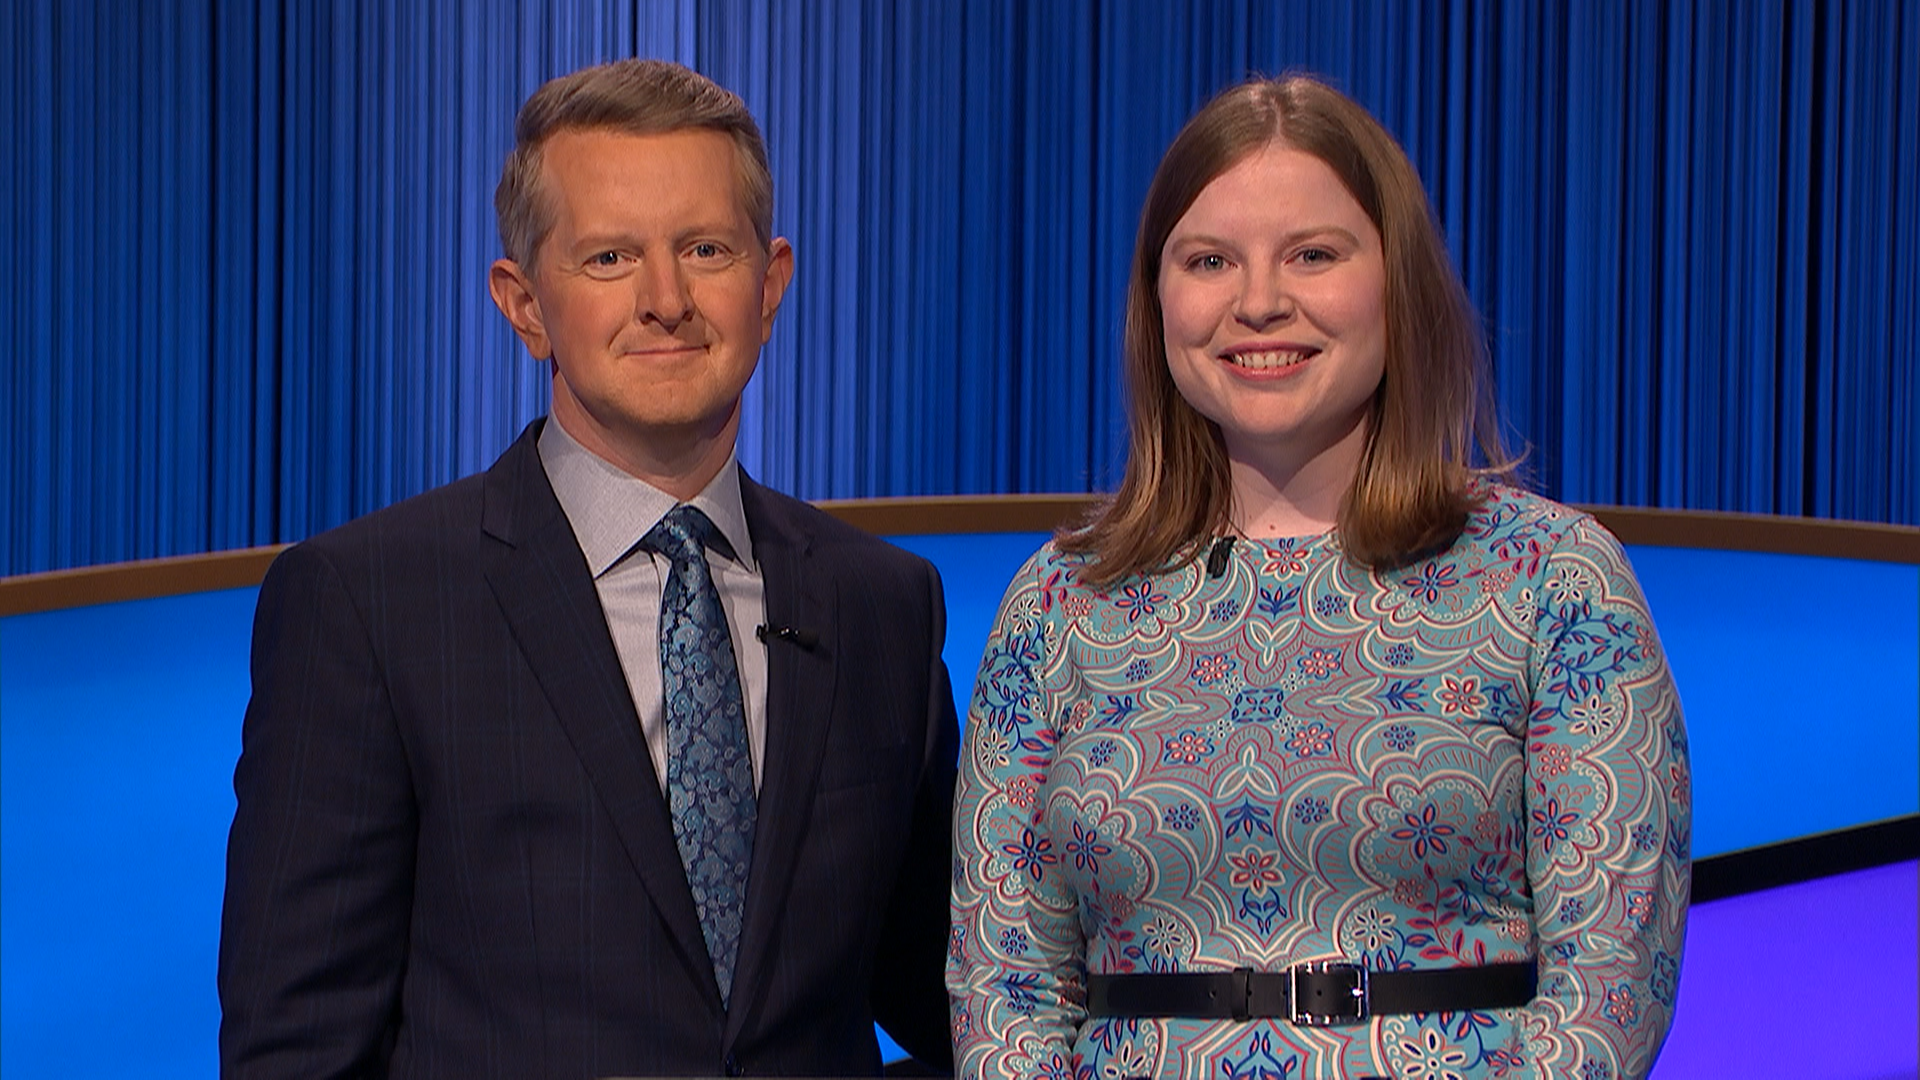 Who's on "Jeopardy!" today, June 7? Purdue archivist Adriana Harmeyer shoots for 8th win